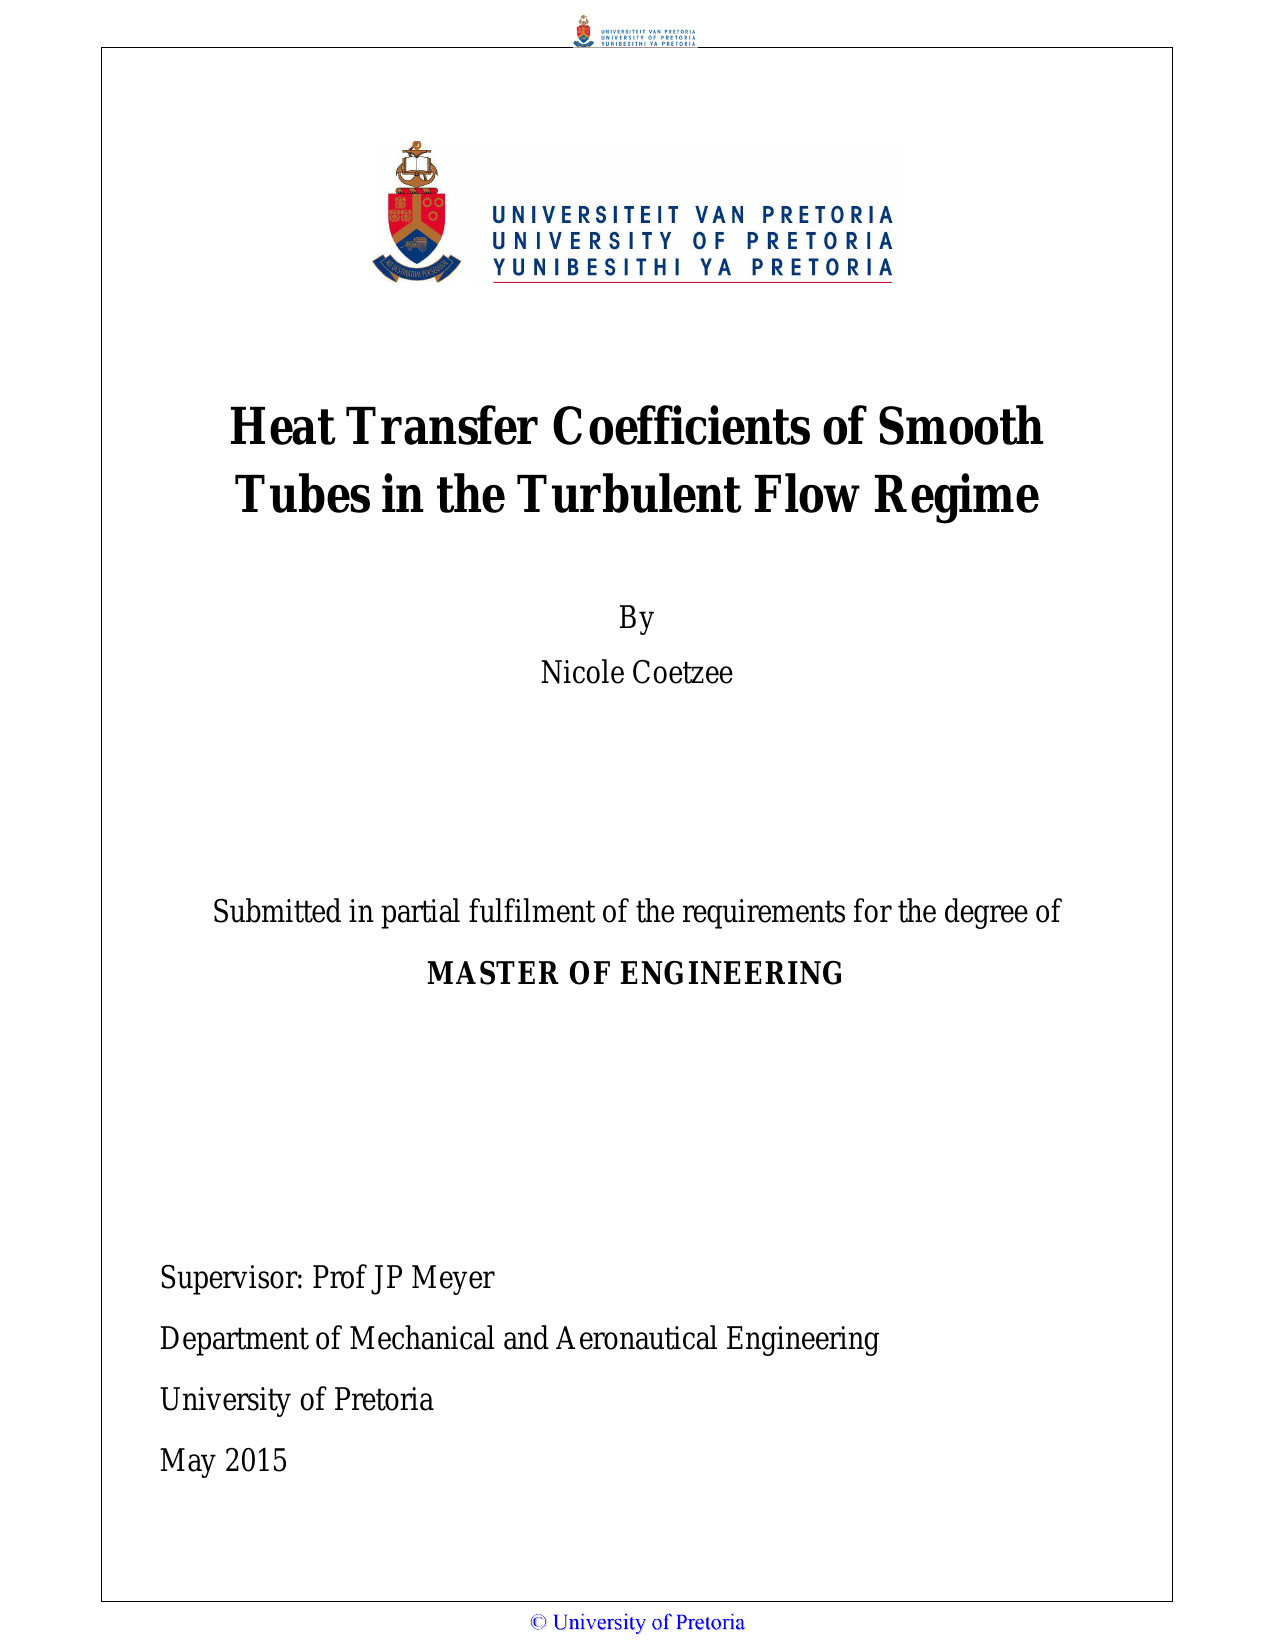 Heat Transfer Coefficients Of Smooth Tubes In The Turbulent Flow Regime Manualzz